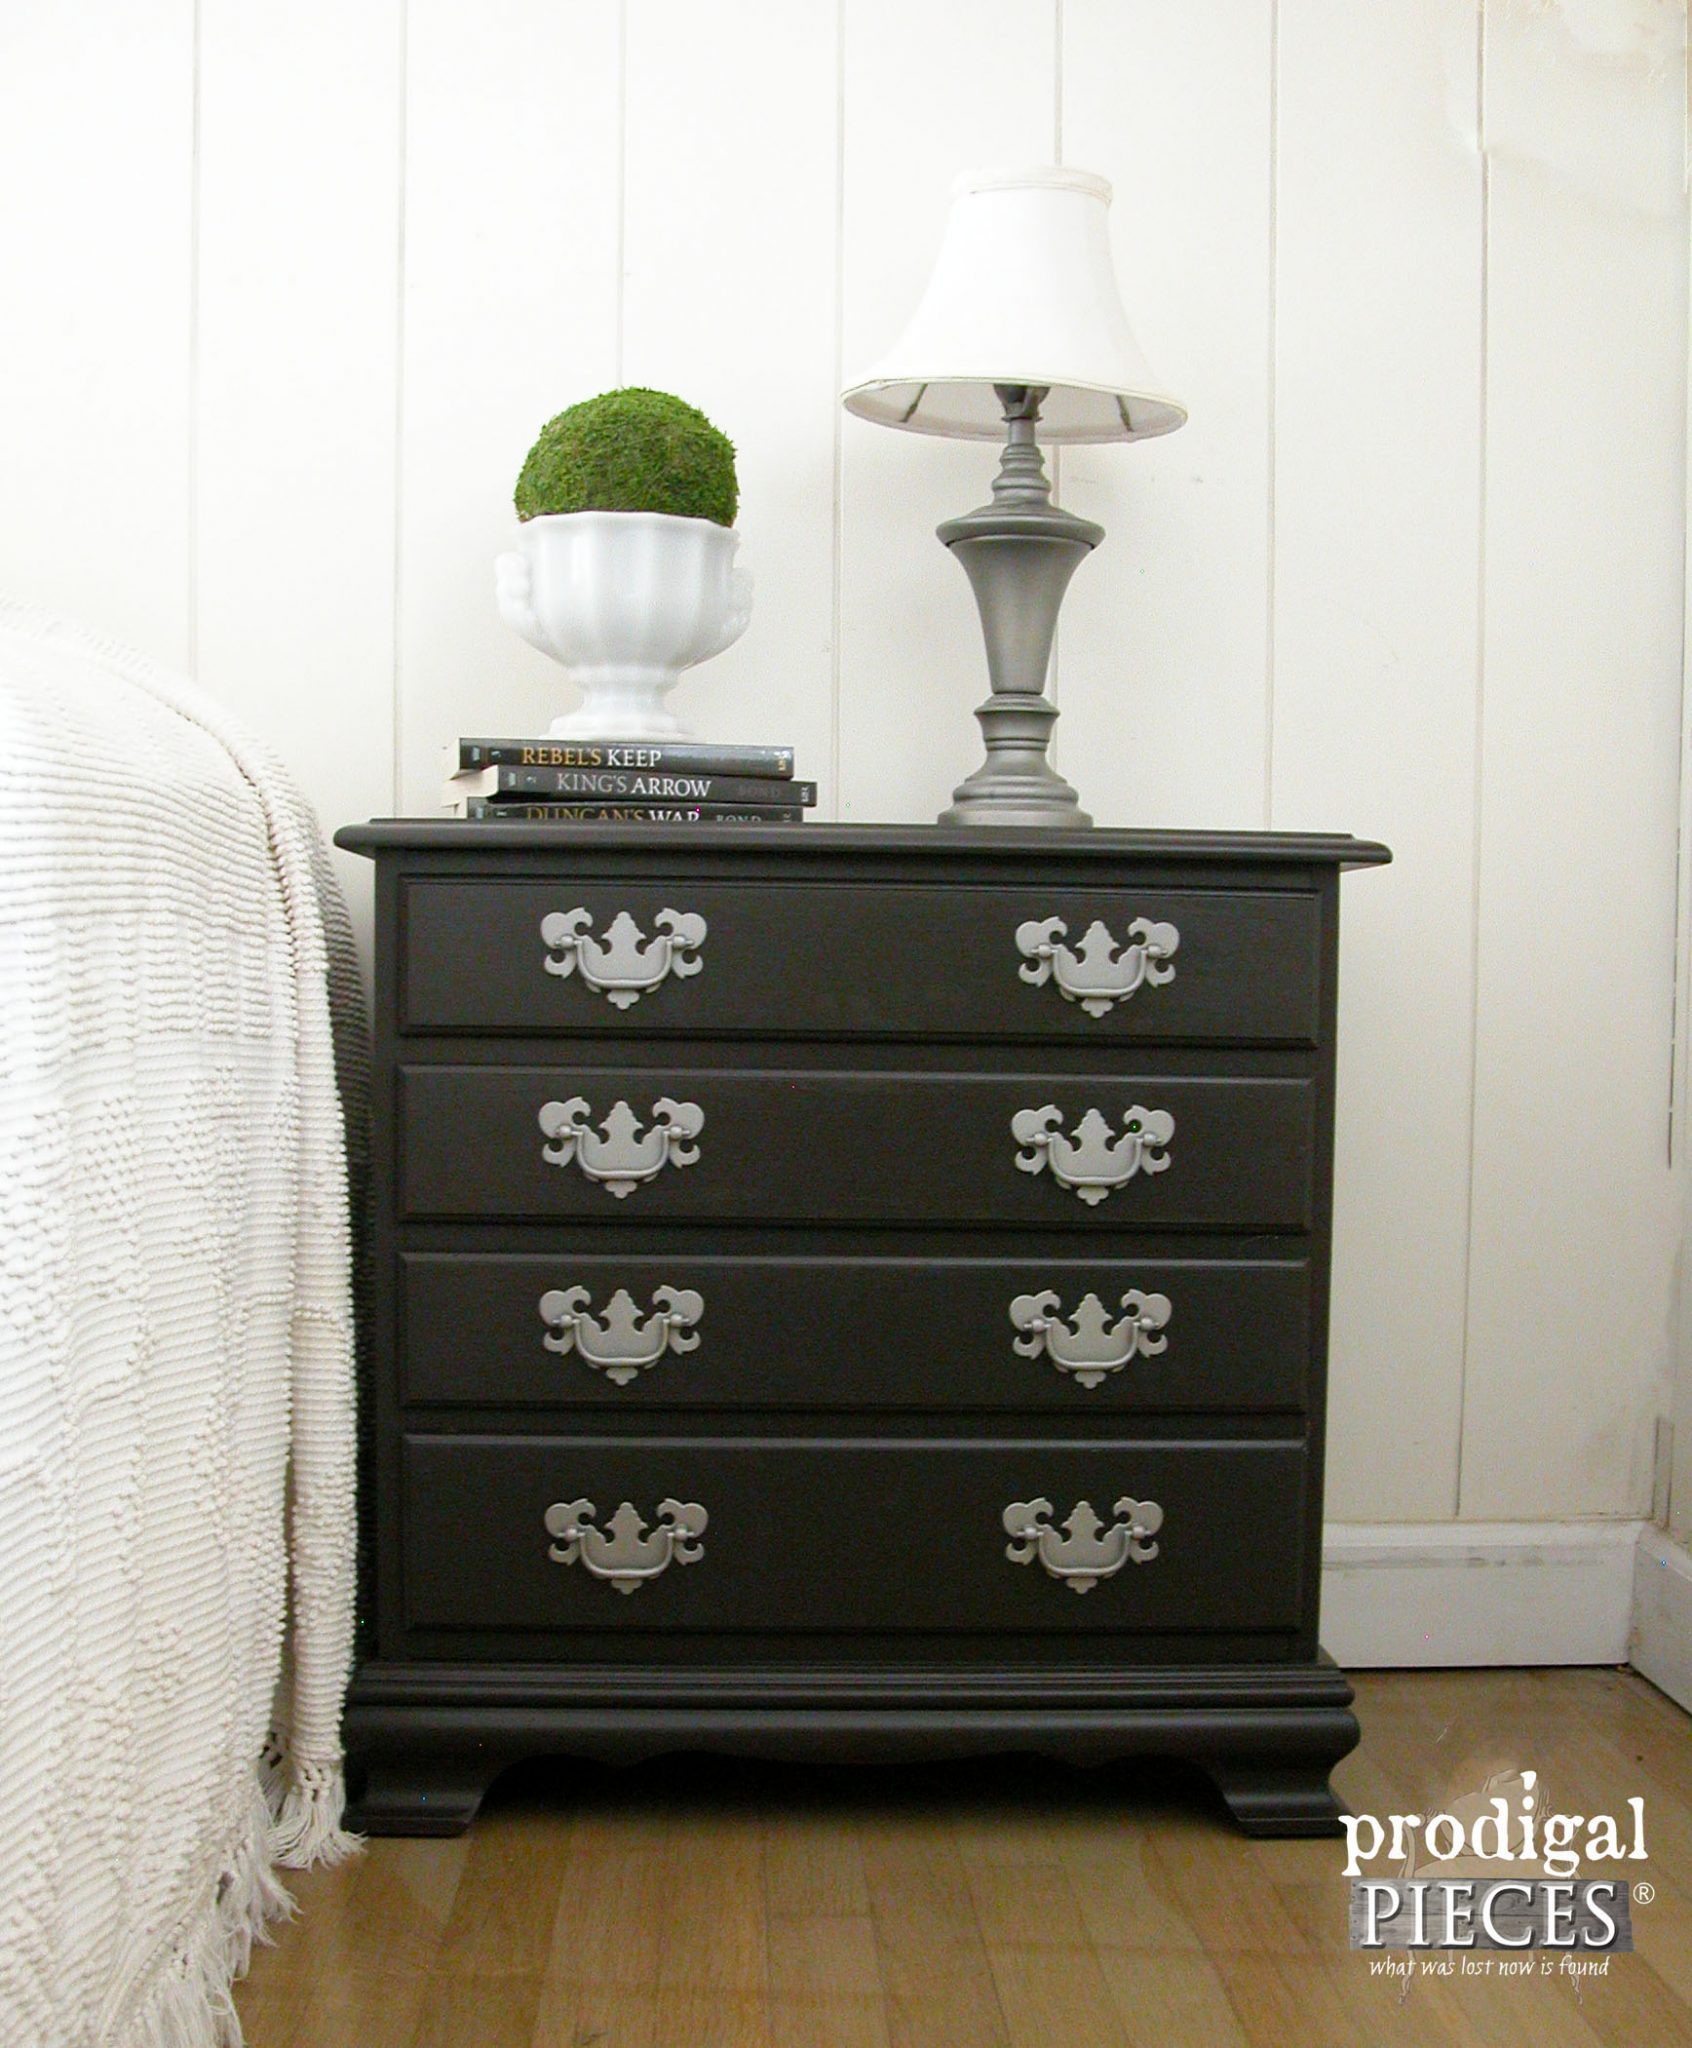 Modern Farmhouse Chic Nightstand Makeover by Prodigal Pieces | prodigalpieces.com